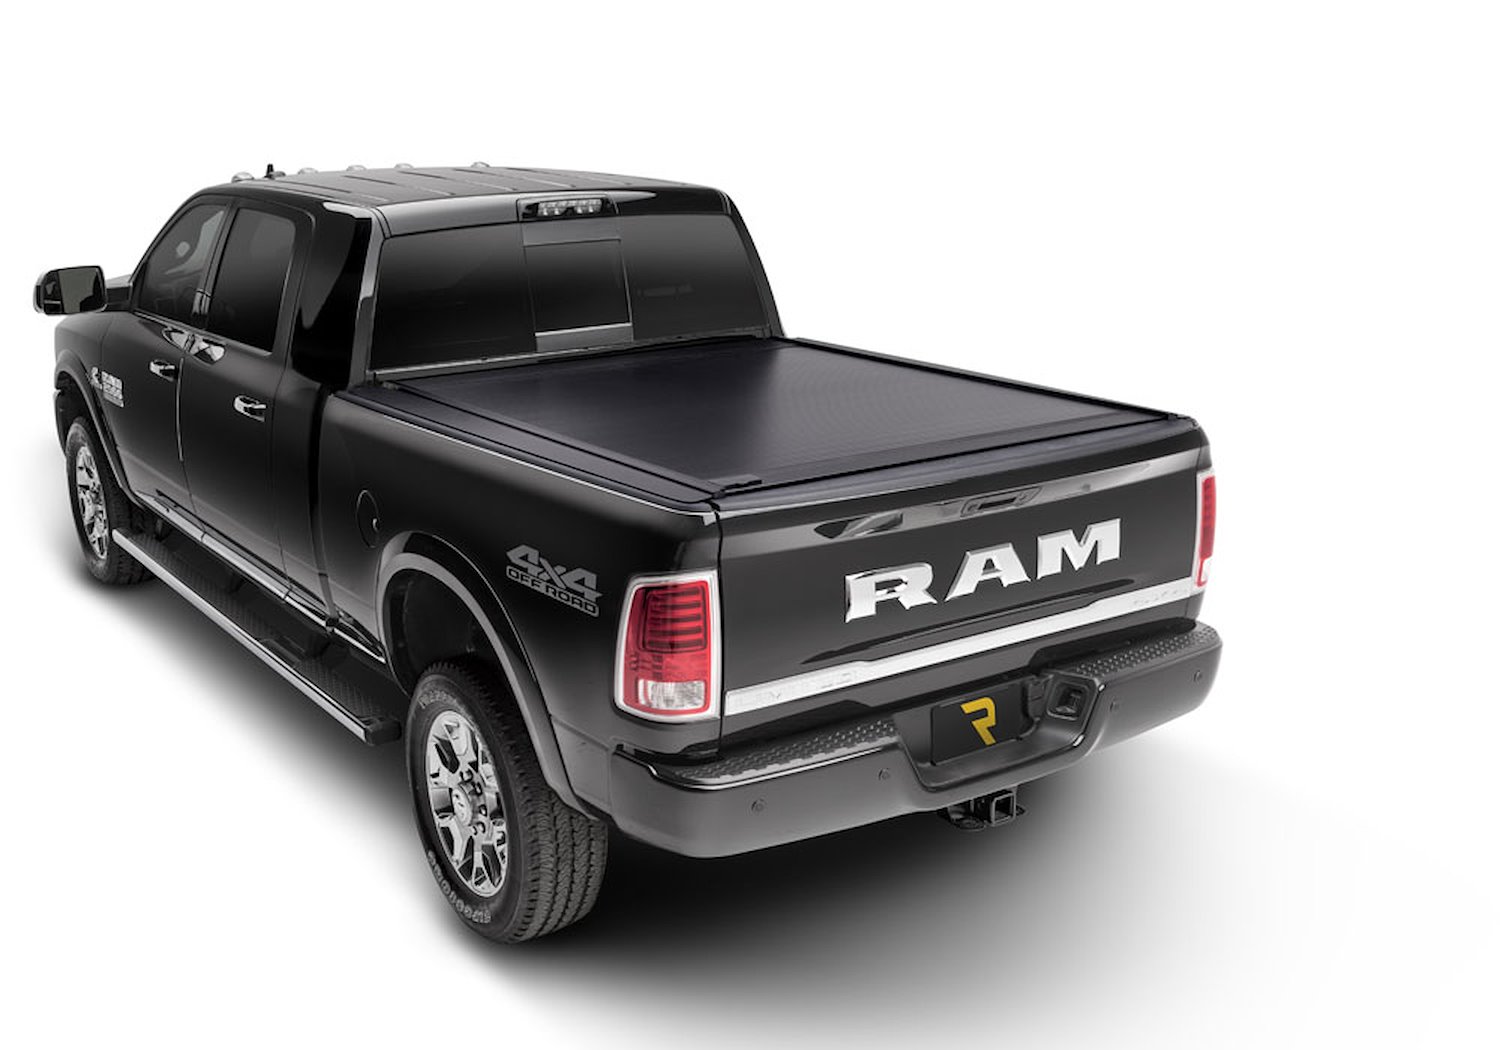 60231 RetraxOne MX Retractable Tonneau Cover Fits Select Dodge/Ram 5' 7" Bed without RamBox without Stake Pockets